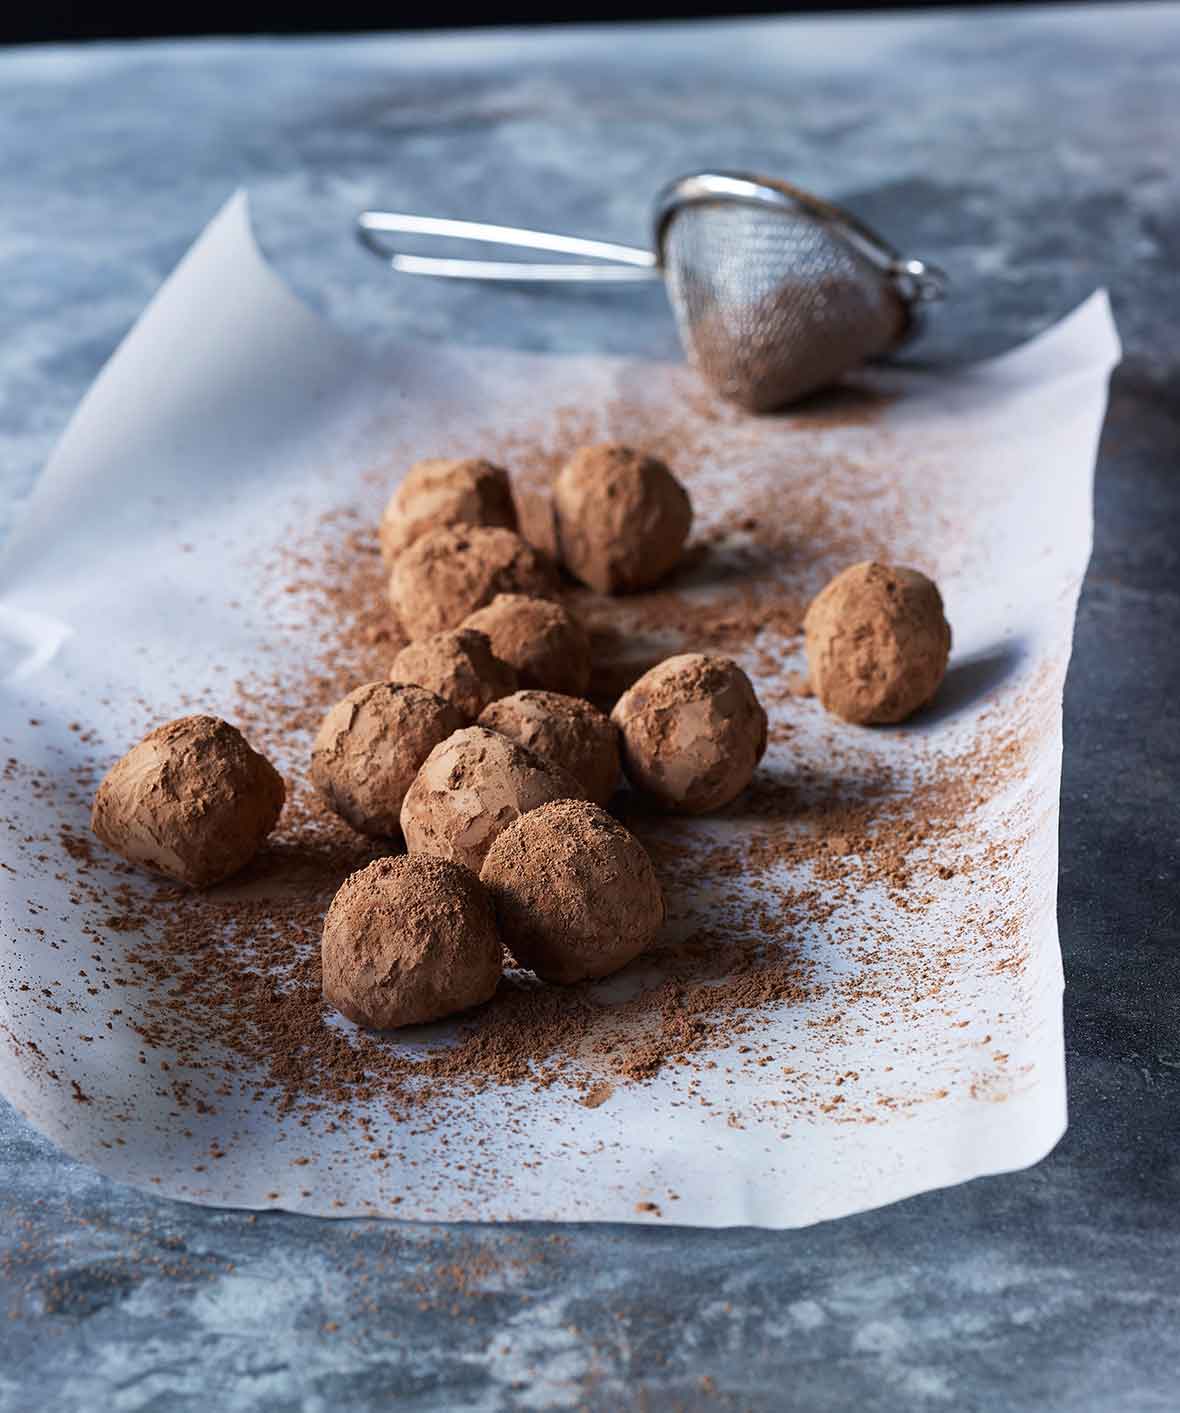 A sheet of parchment paper topped with chocolate truffles and a sifter of cocoa powder on the side